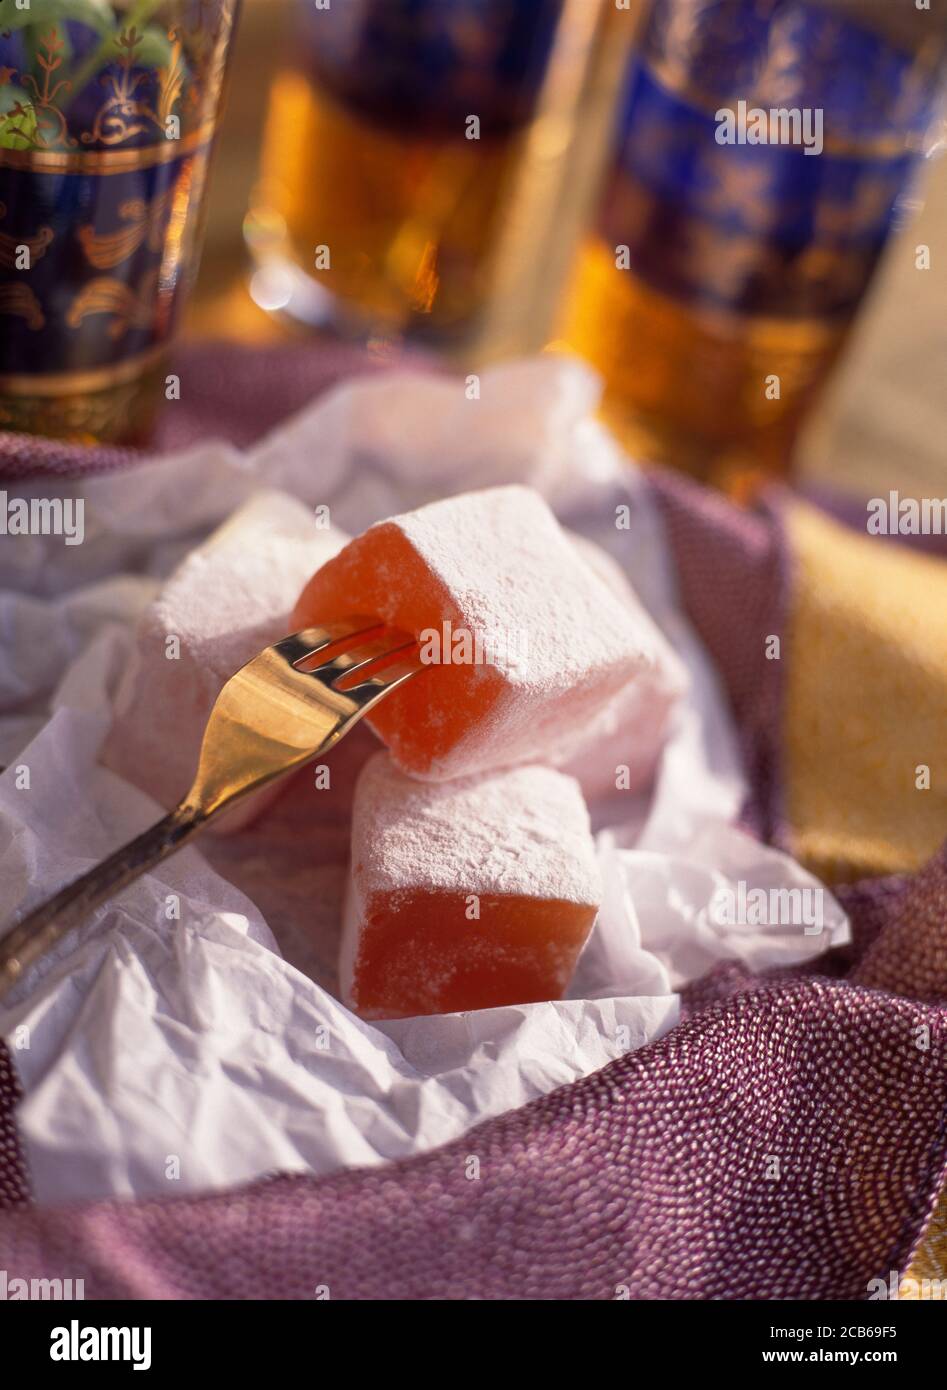 Turkish Delight speared on a fork Stock Photo